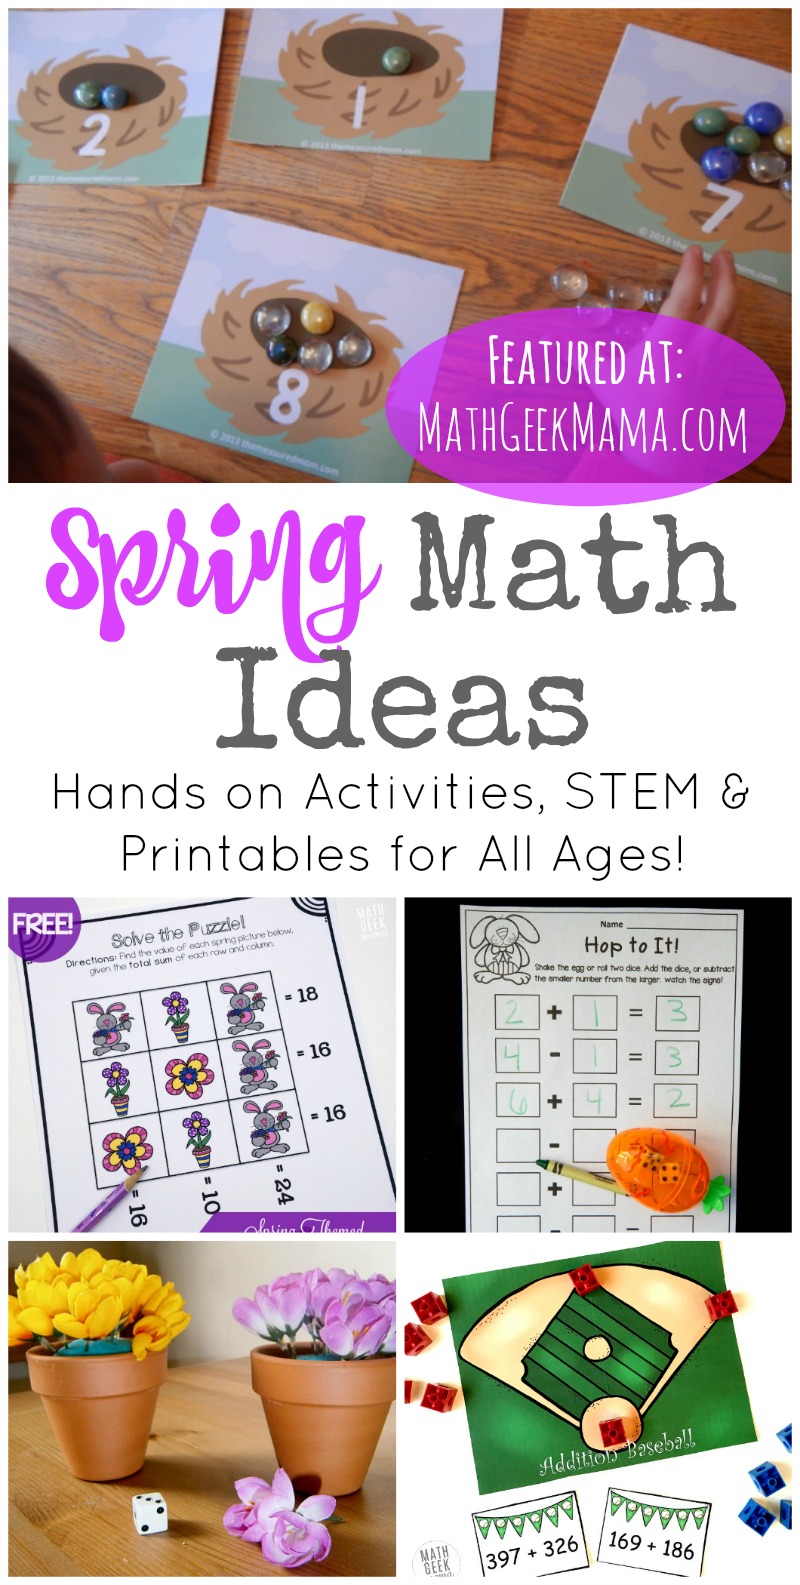 Looking for some new and fresh math ideas? This HUGE list includes more than 50 spring math ideas for all ages! You'll find low prep math worksheets, hands on activities, simple math games, spring STEM and more.